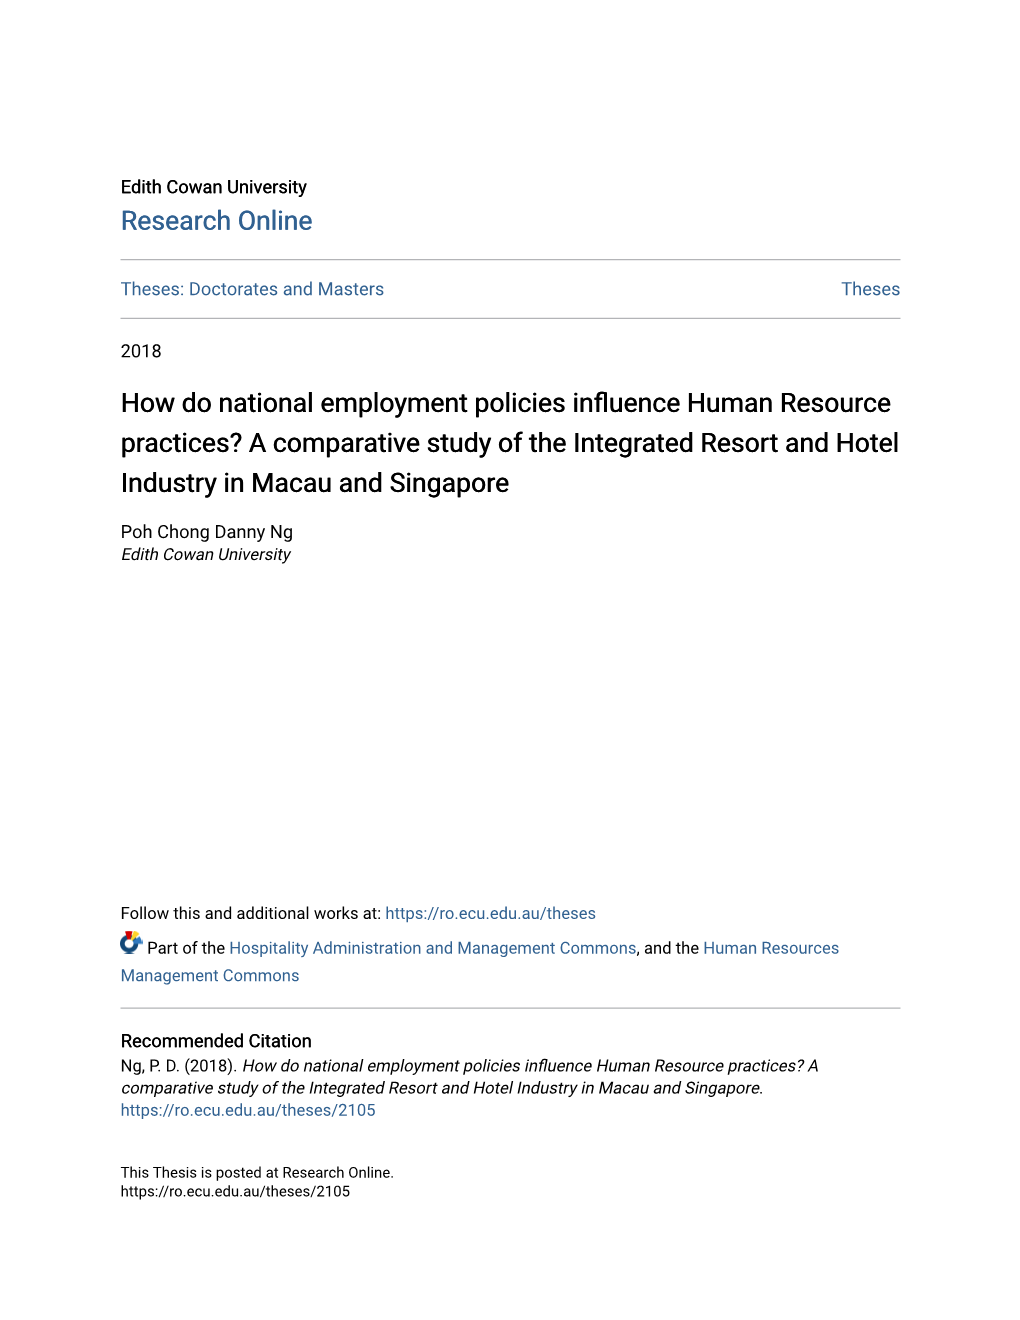 How Do National Employment Policies Influence Human Resource Practices? a Comparative Study of the Integrated Resort and Hotel Industry in Macau and Singapore